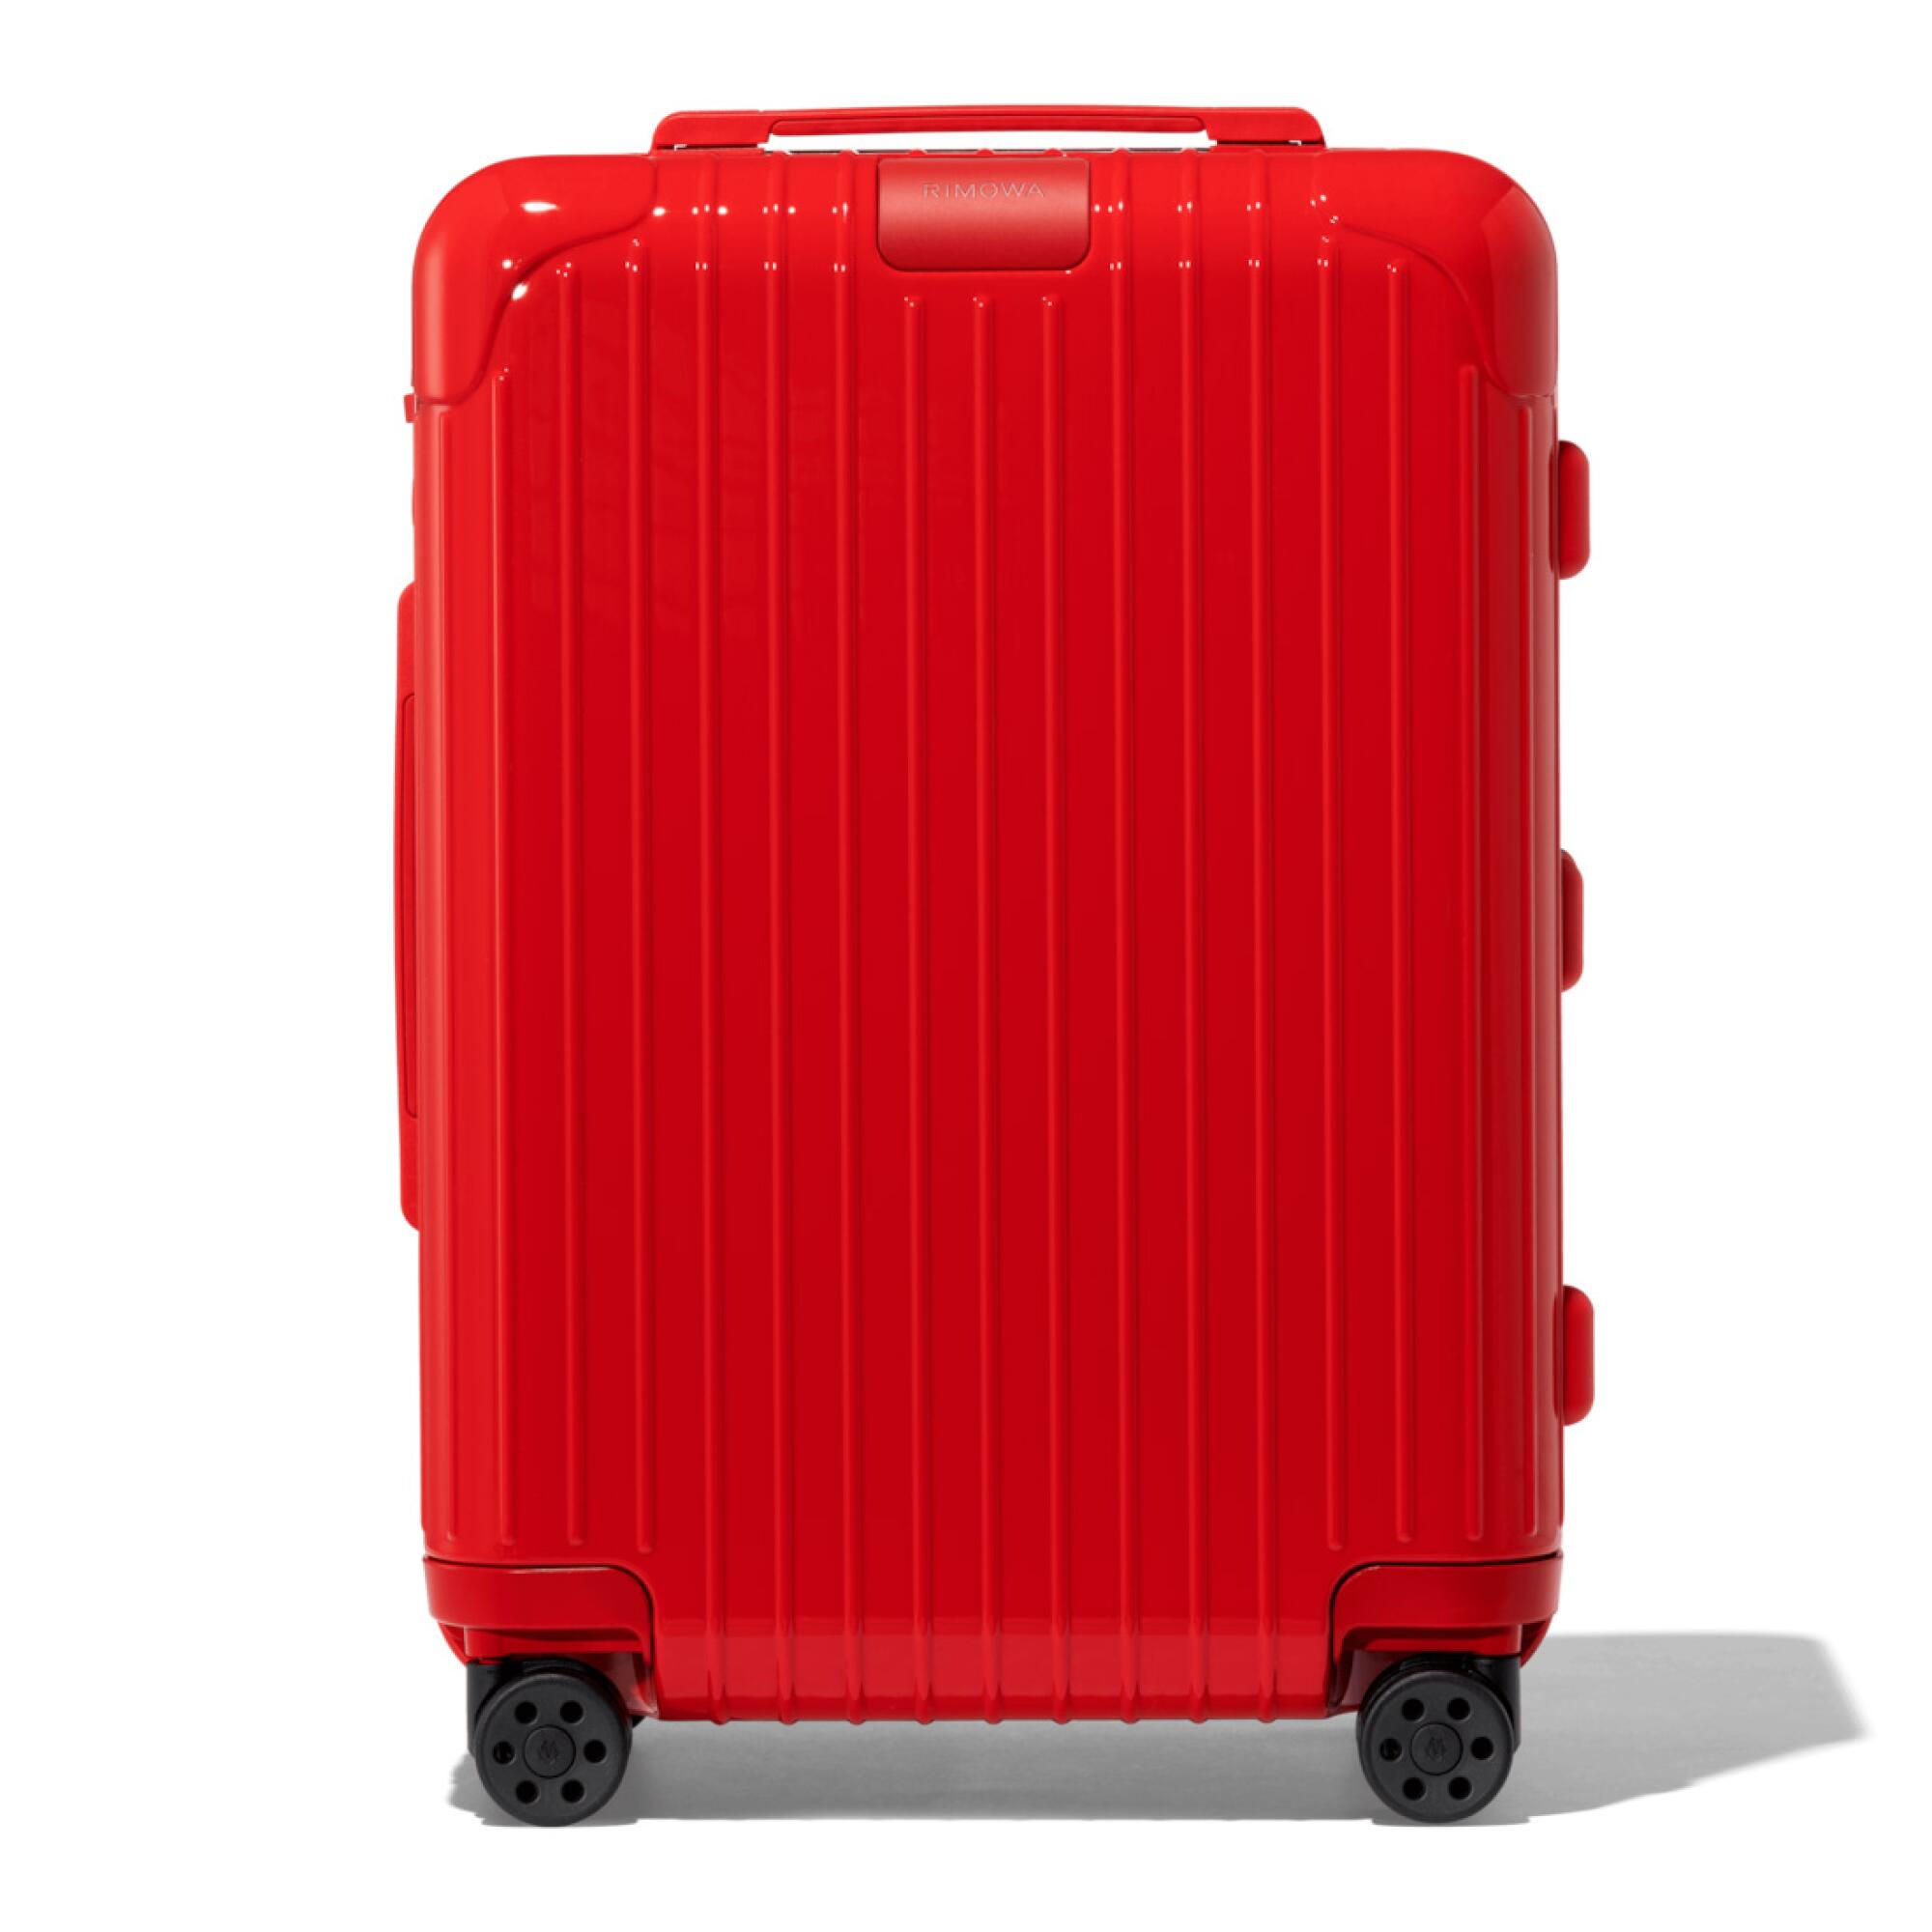 A red wheeled suitcase